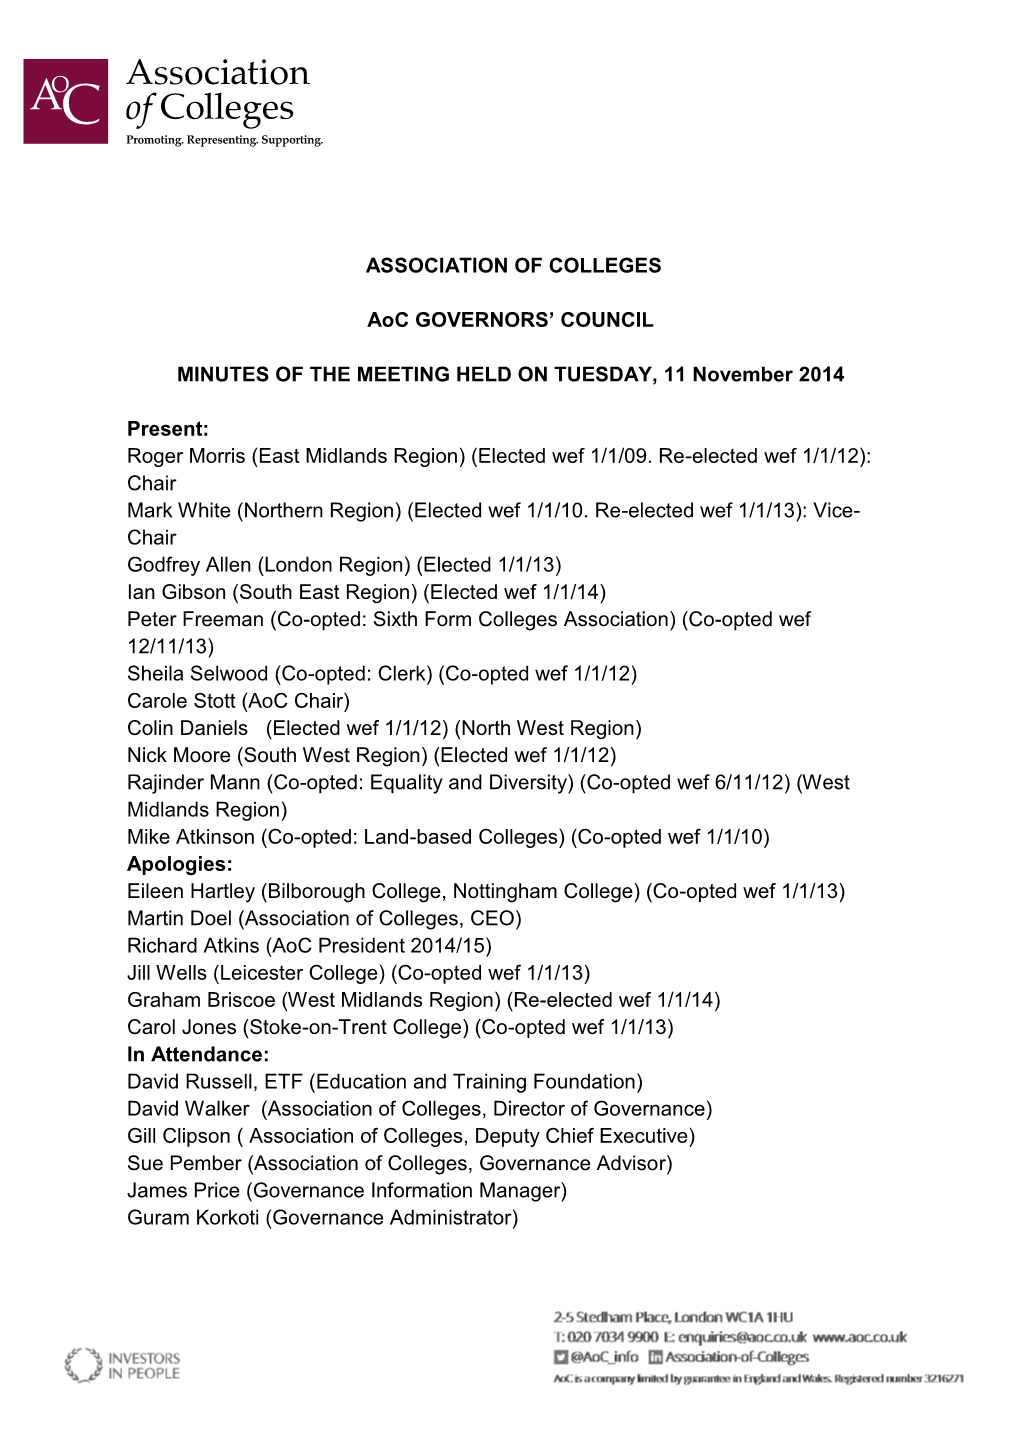 ASSOCIATION of COLLEGES Aoc GOVERNORS' COUNCIL MINUTES of the MEETING HELD on TUESDAY, 11 November 2014 Present: Roger Morris